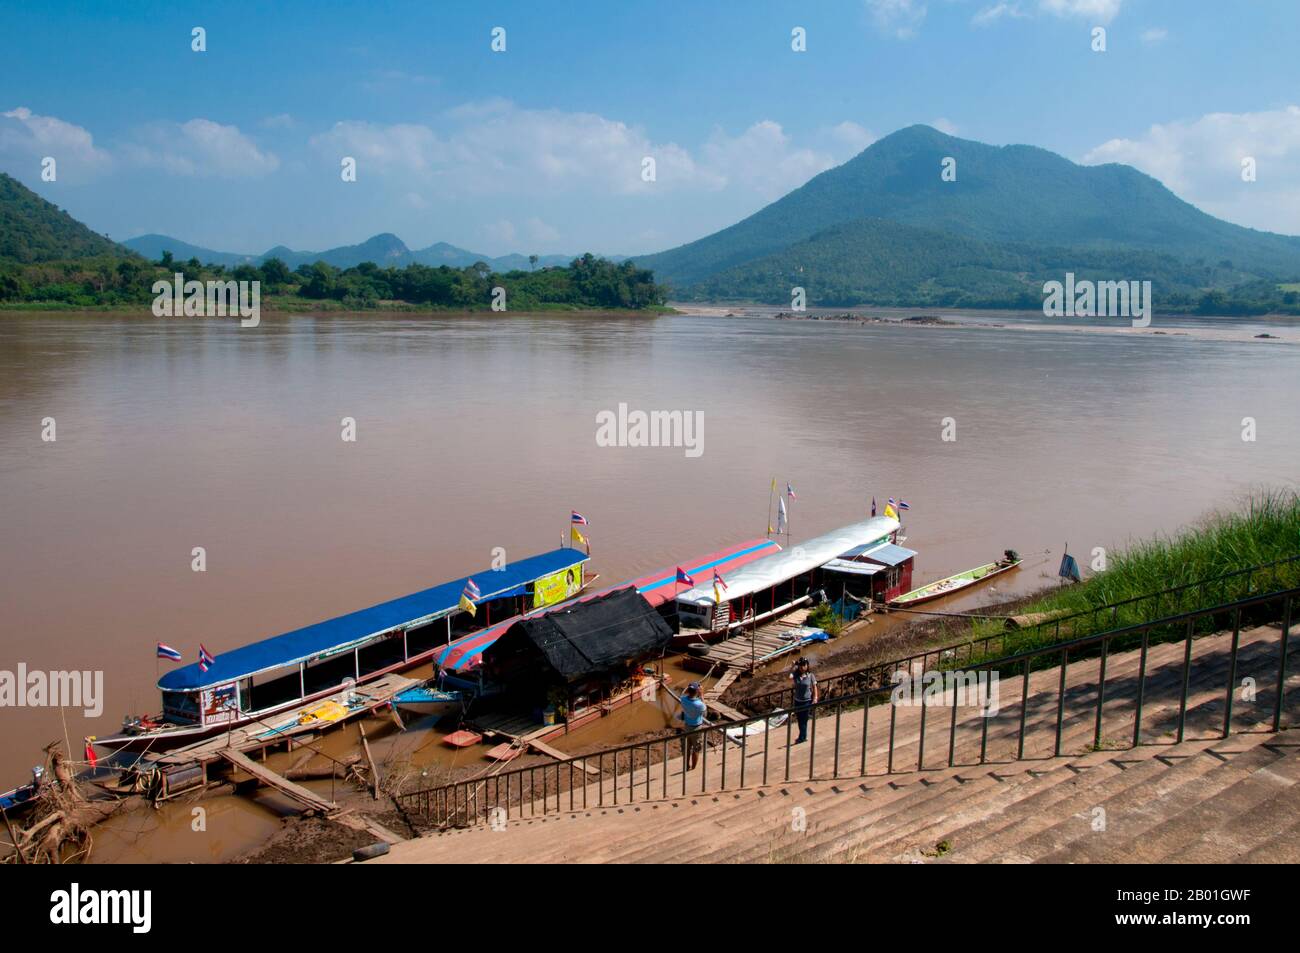 Thailand: Tour boats moored on the Mekong River at Kaeng Khut Khu, Loei Province.  Loei (Thai: เลย) Province is located in Thailand's upper North-East. Neighboring provinces are (from east clockwise) Nong Khai, Udon Thani, Nongbua Lamphu, Khon Kaen, Phetchabun, Phitsanulok. In the north it borders Xaignabouli and Vientiane Provinces of Laos.  The province is covered with low mountains, while the capital Loei is located in a fertile basin. The Loei River, which flows through the province, is a tributary of the Mekong. Stock Photo